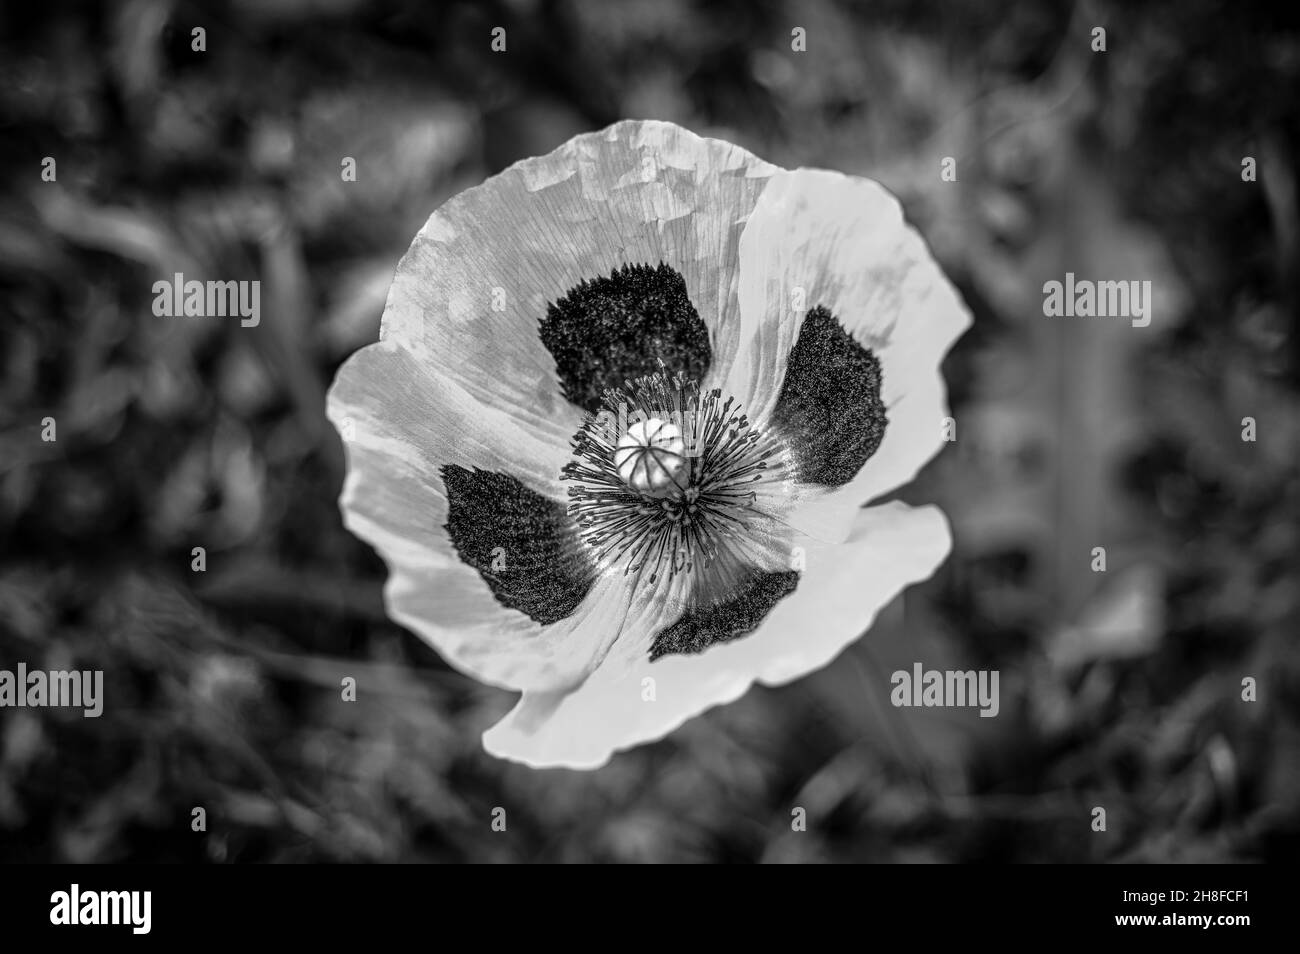 Scarlet poppy Black and White Stock Photos & Images - Alamy